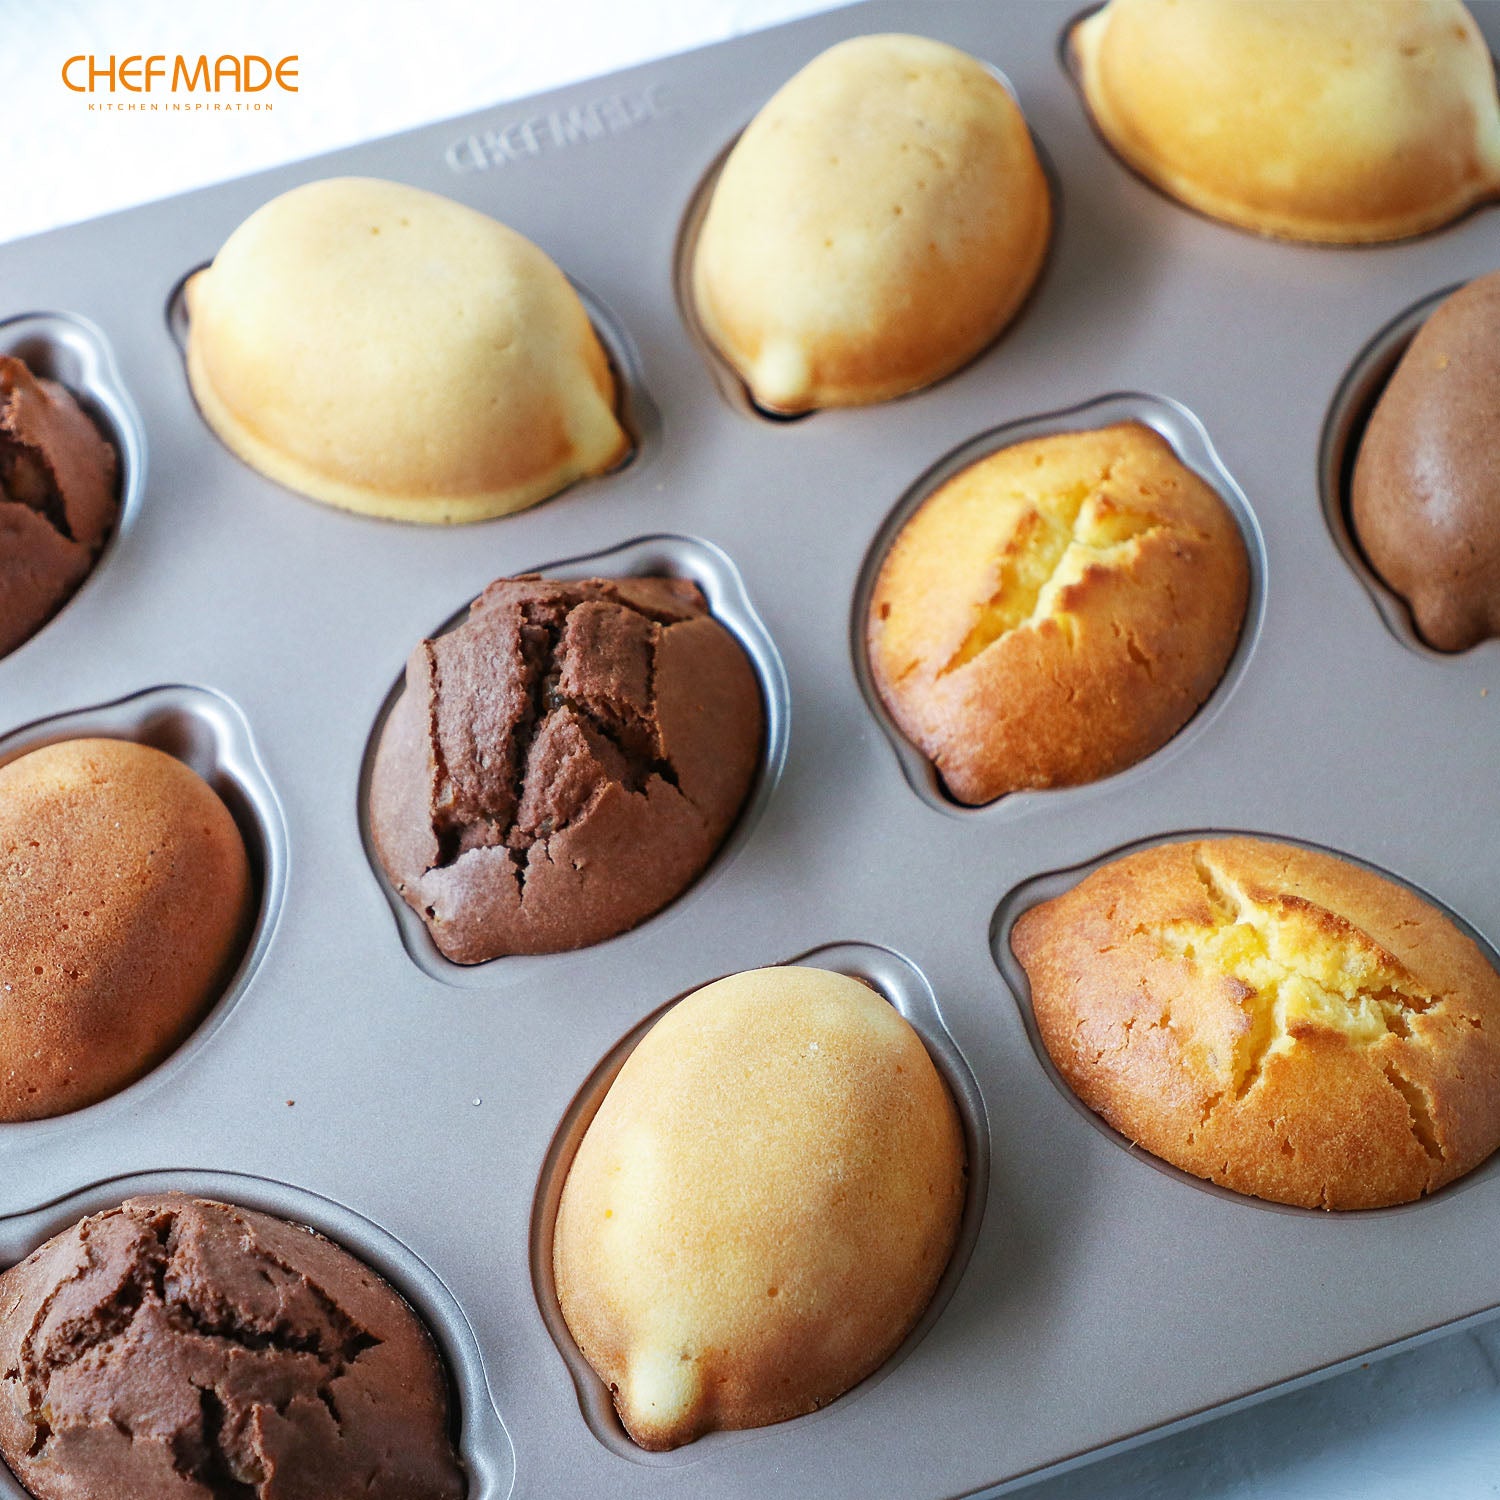 Muffin Pan Mini 12 Well - CHEFMADE official store